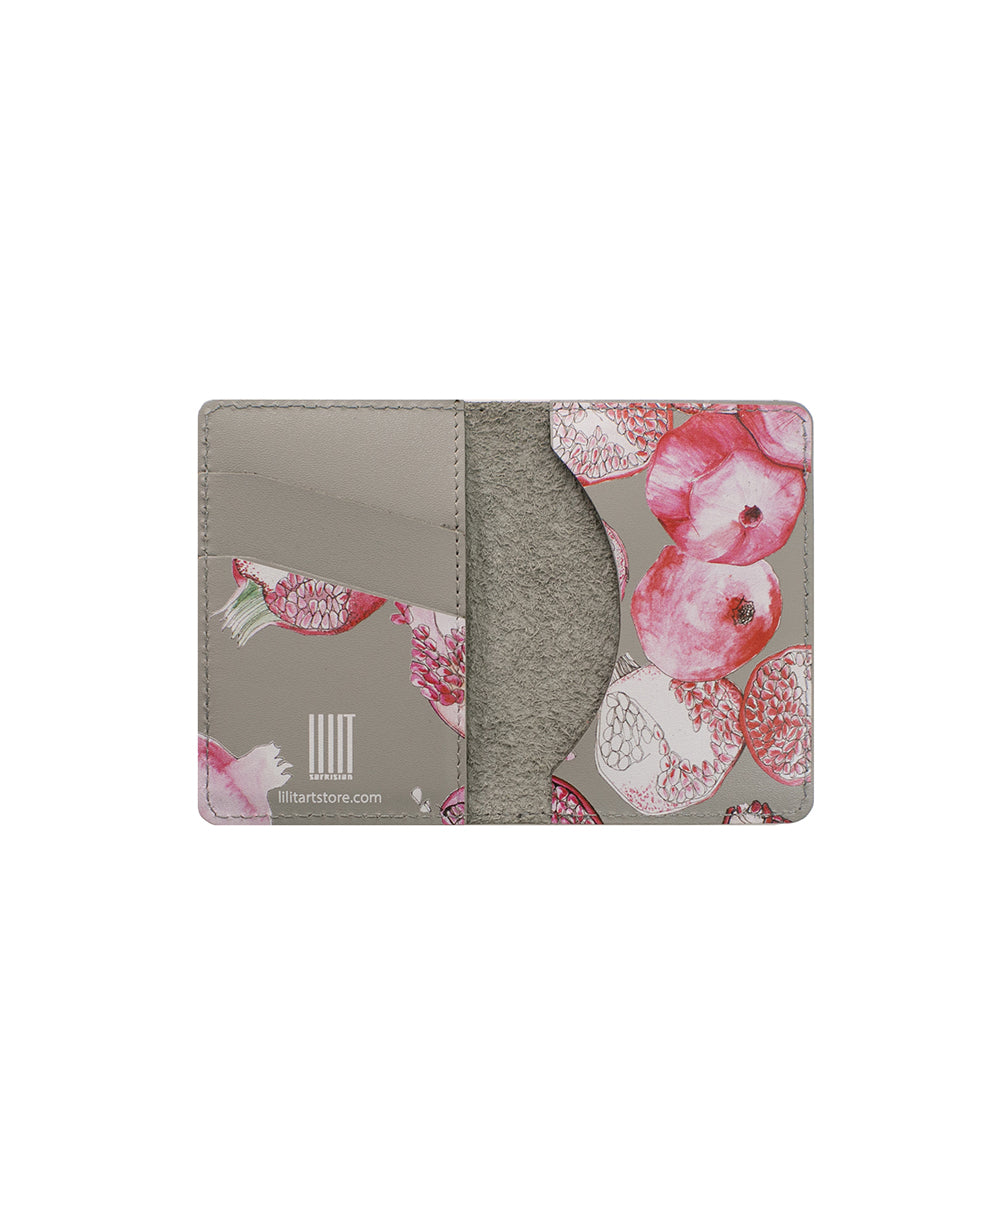 Printed Pomegranate Leather Card Holder